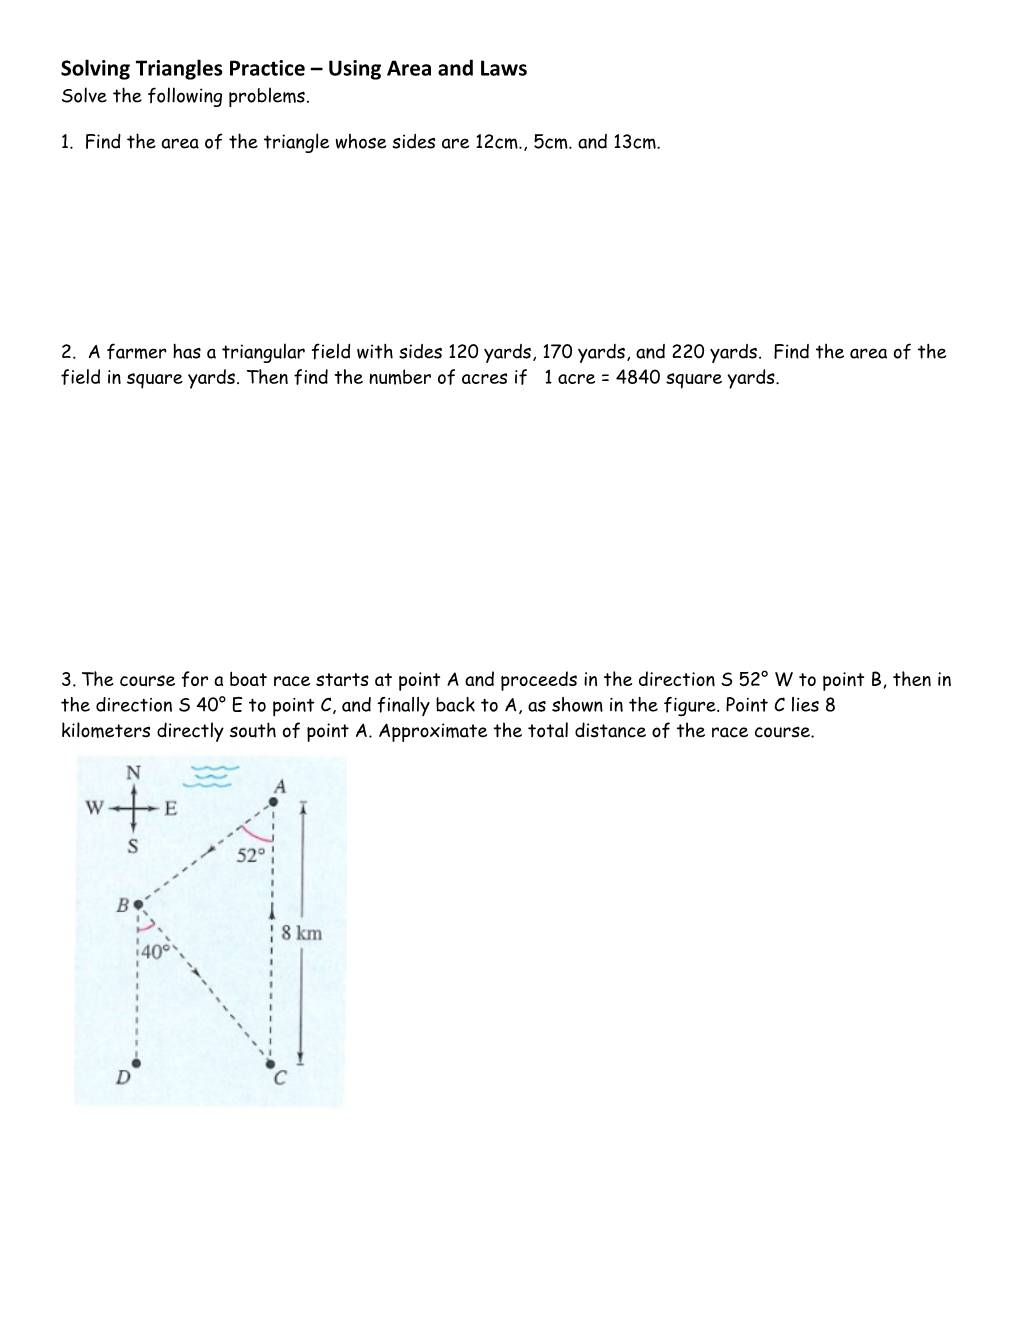 Solving Triangles Practice Using Area and Laws